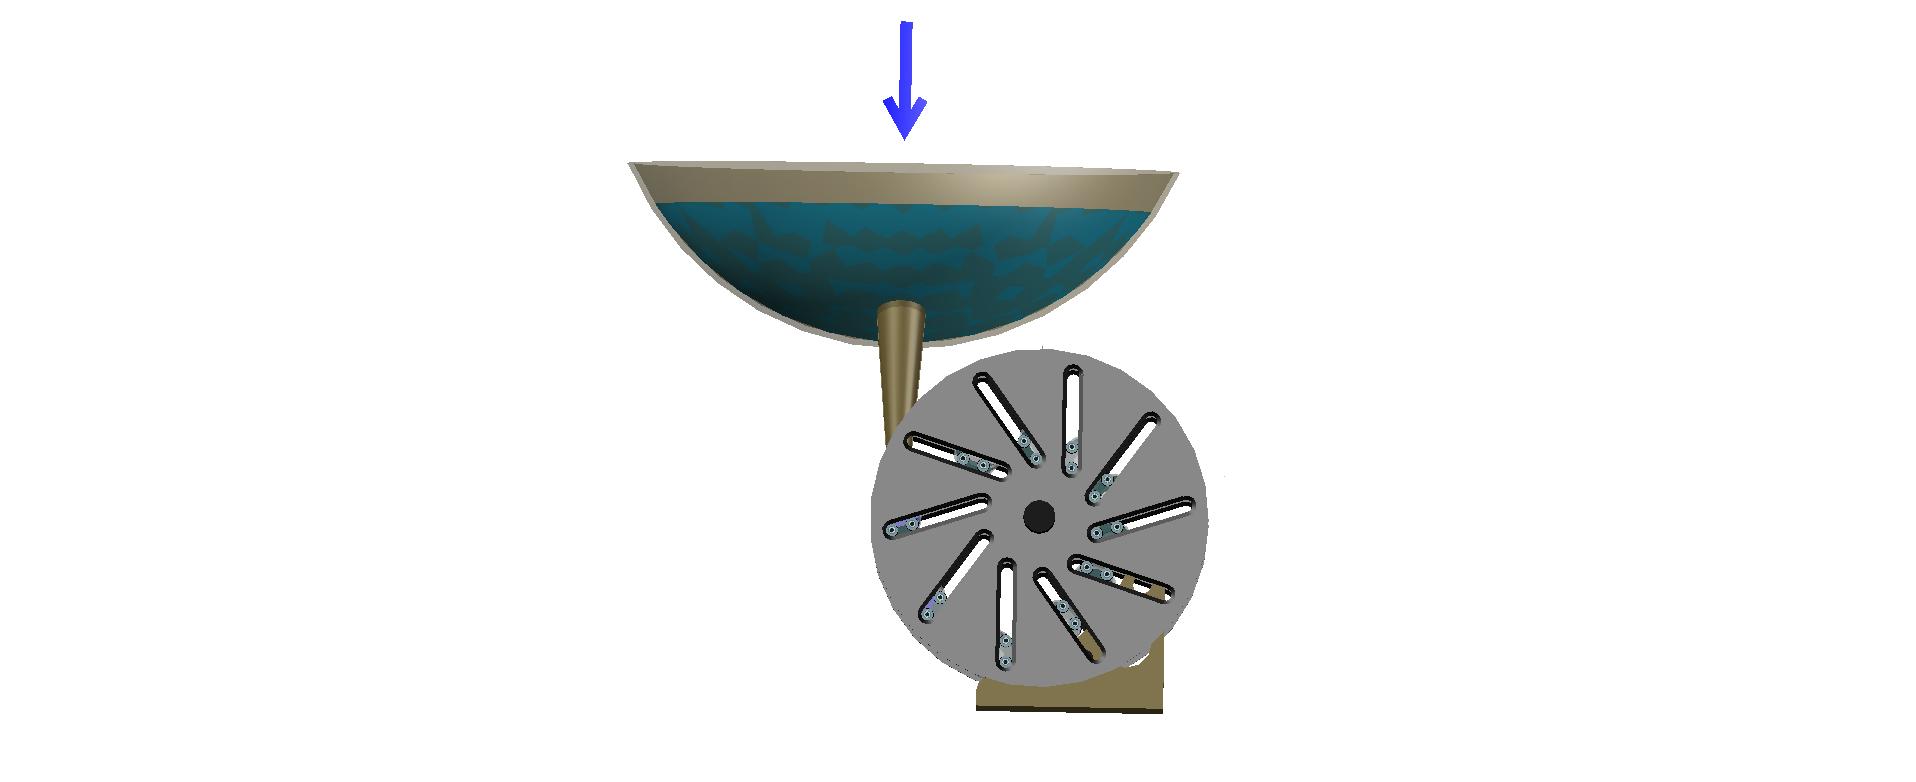 The exterior view of embodiment of the turbine rotor equipped by hollow movable blades, which is under the impact of the water pressure coming from only one nozzle.